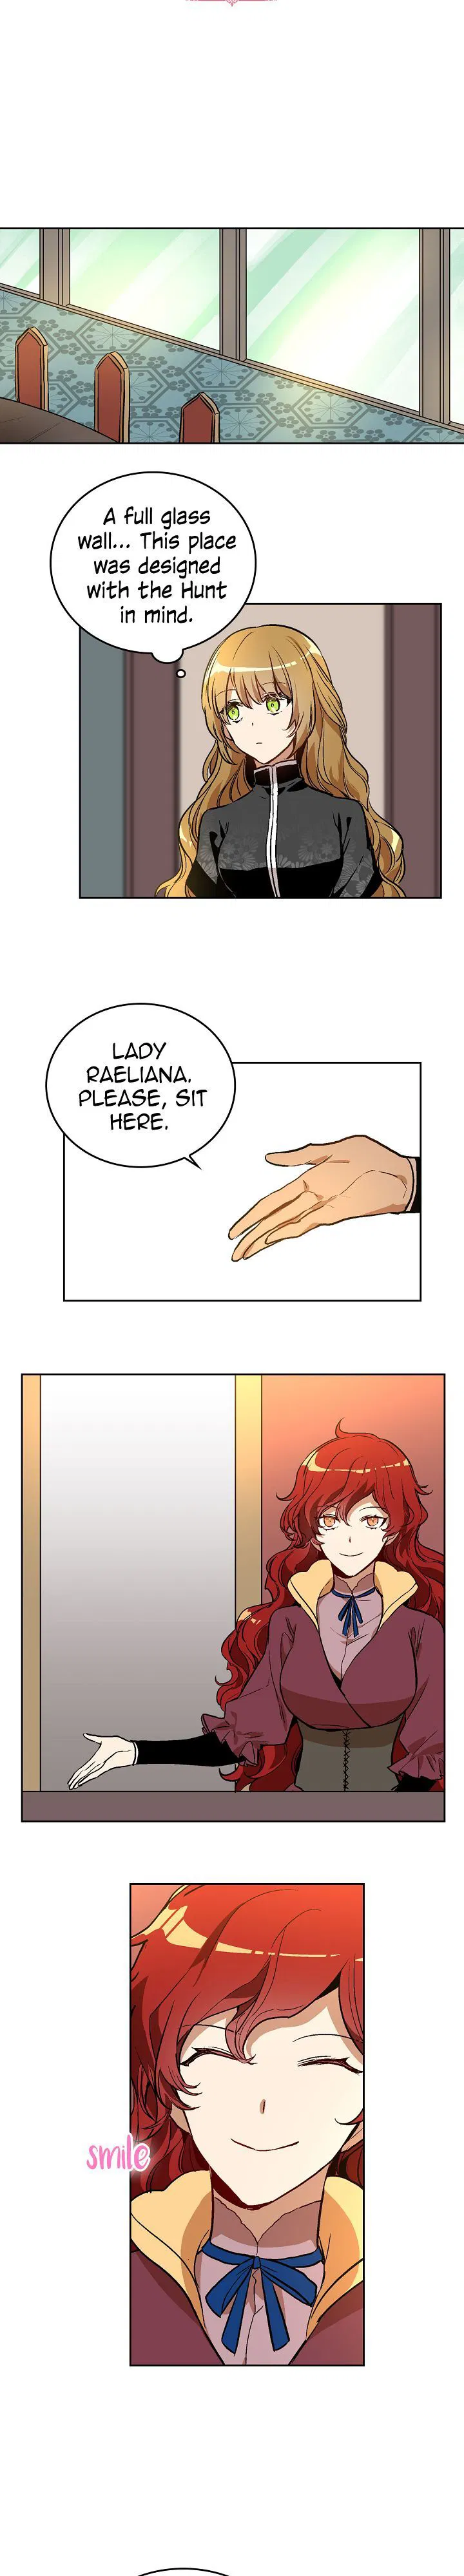 The Reason Why Raeliana Ended Up at the Duke's Mansion Chapter 031 page 3